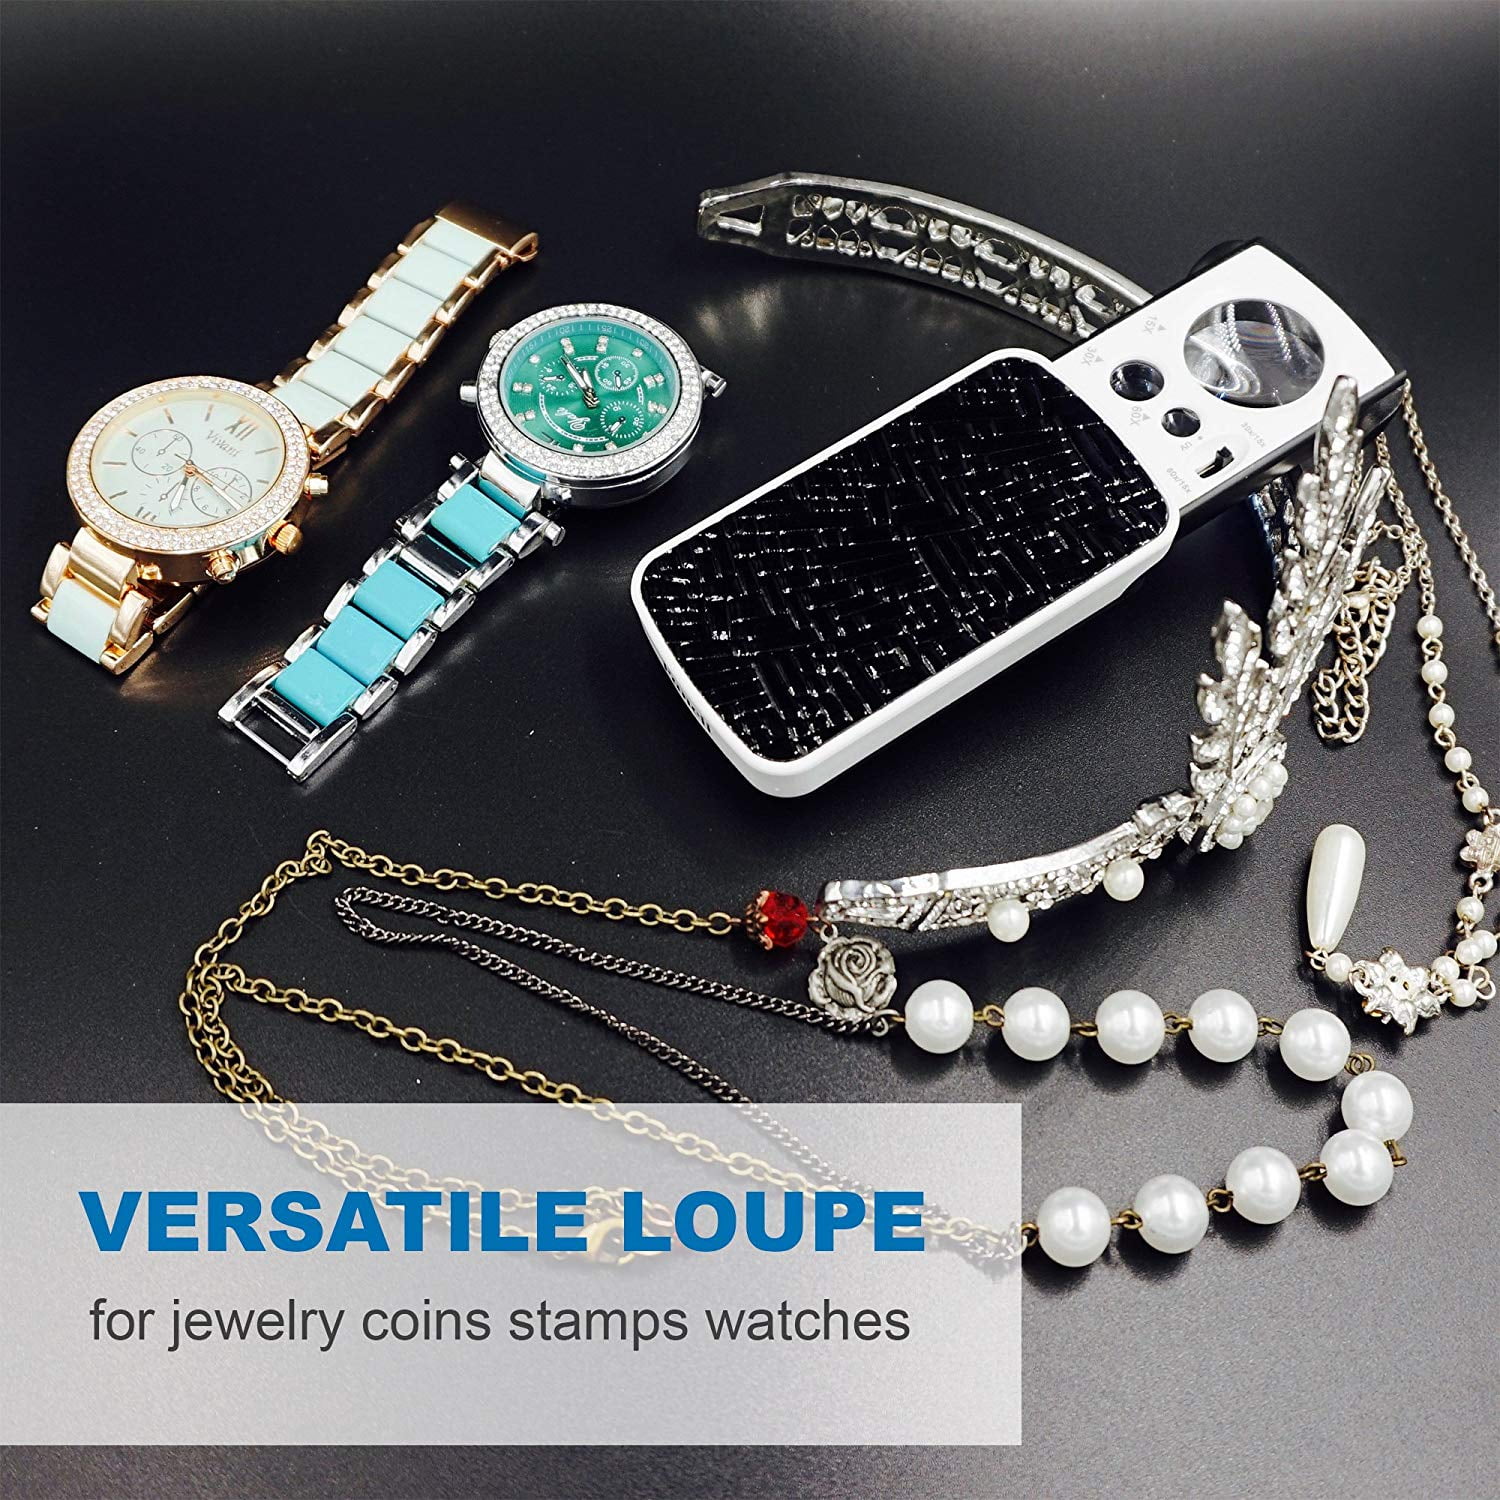 Stamps Best for Jewelry Diamonds Coins Gems Rocks etc LED Lighted Slide Out Pocket Jewelry Loupe 30X 60X and 90X Multi-Power Small Portable Loupe Magnifier with UV Black Light 